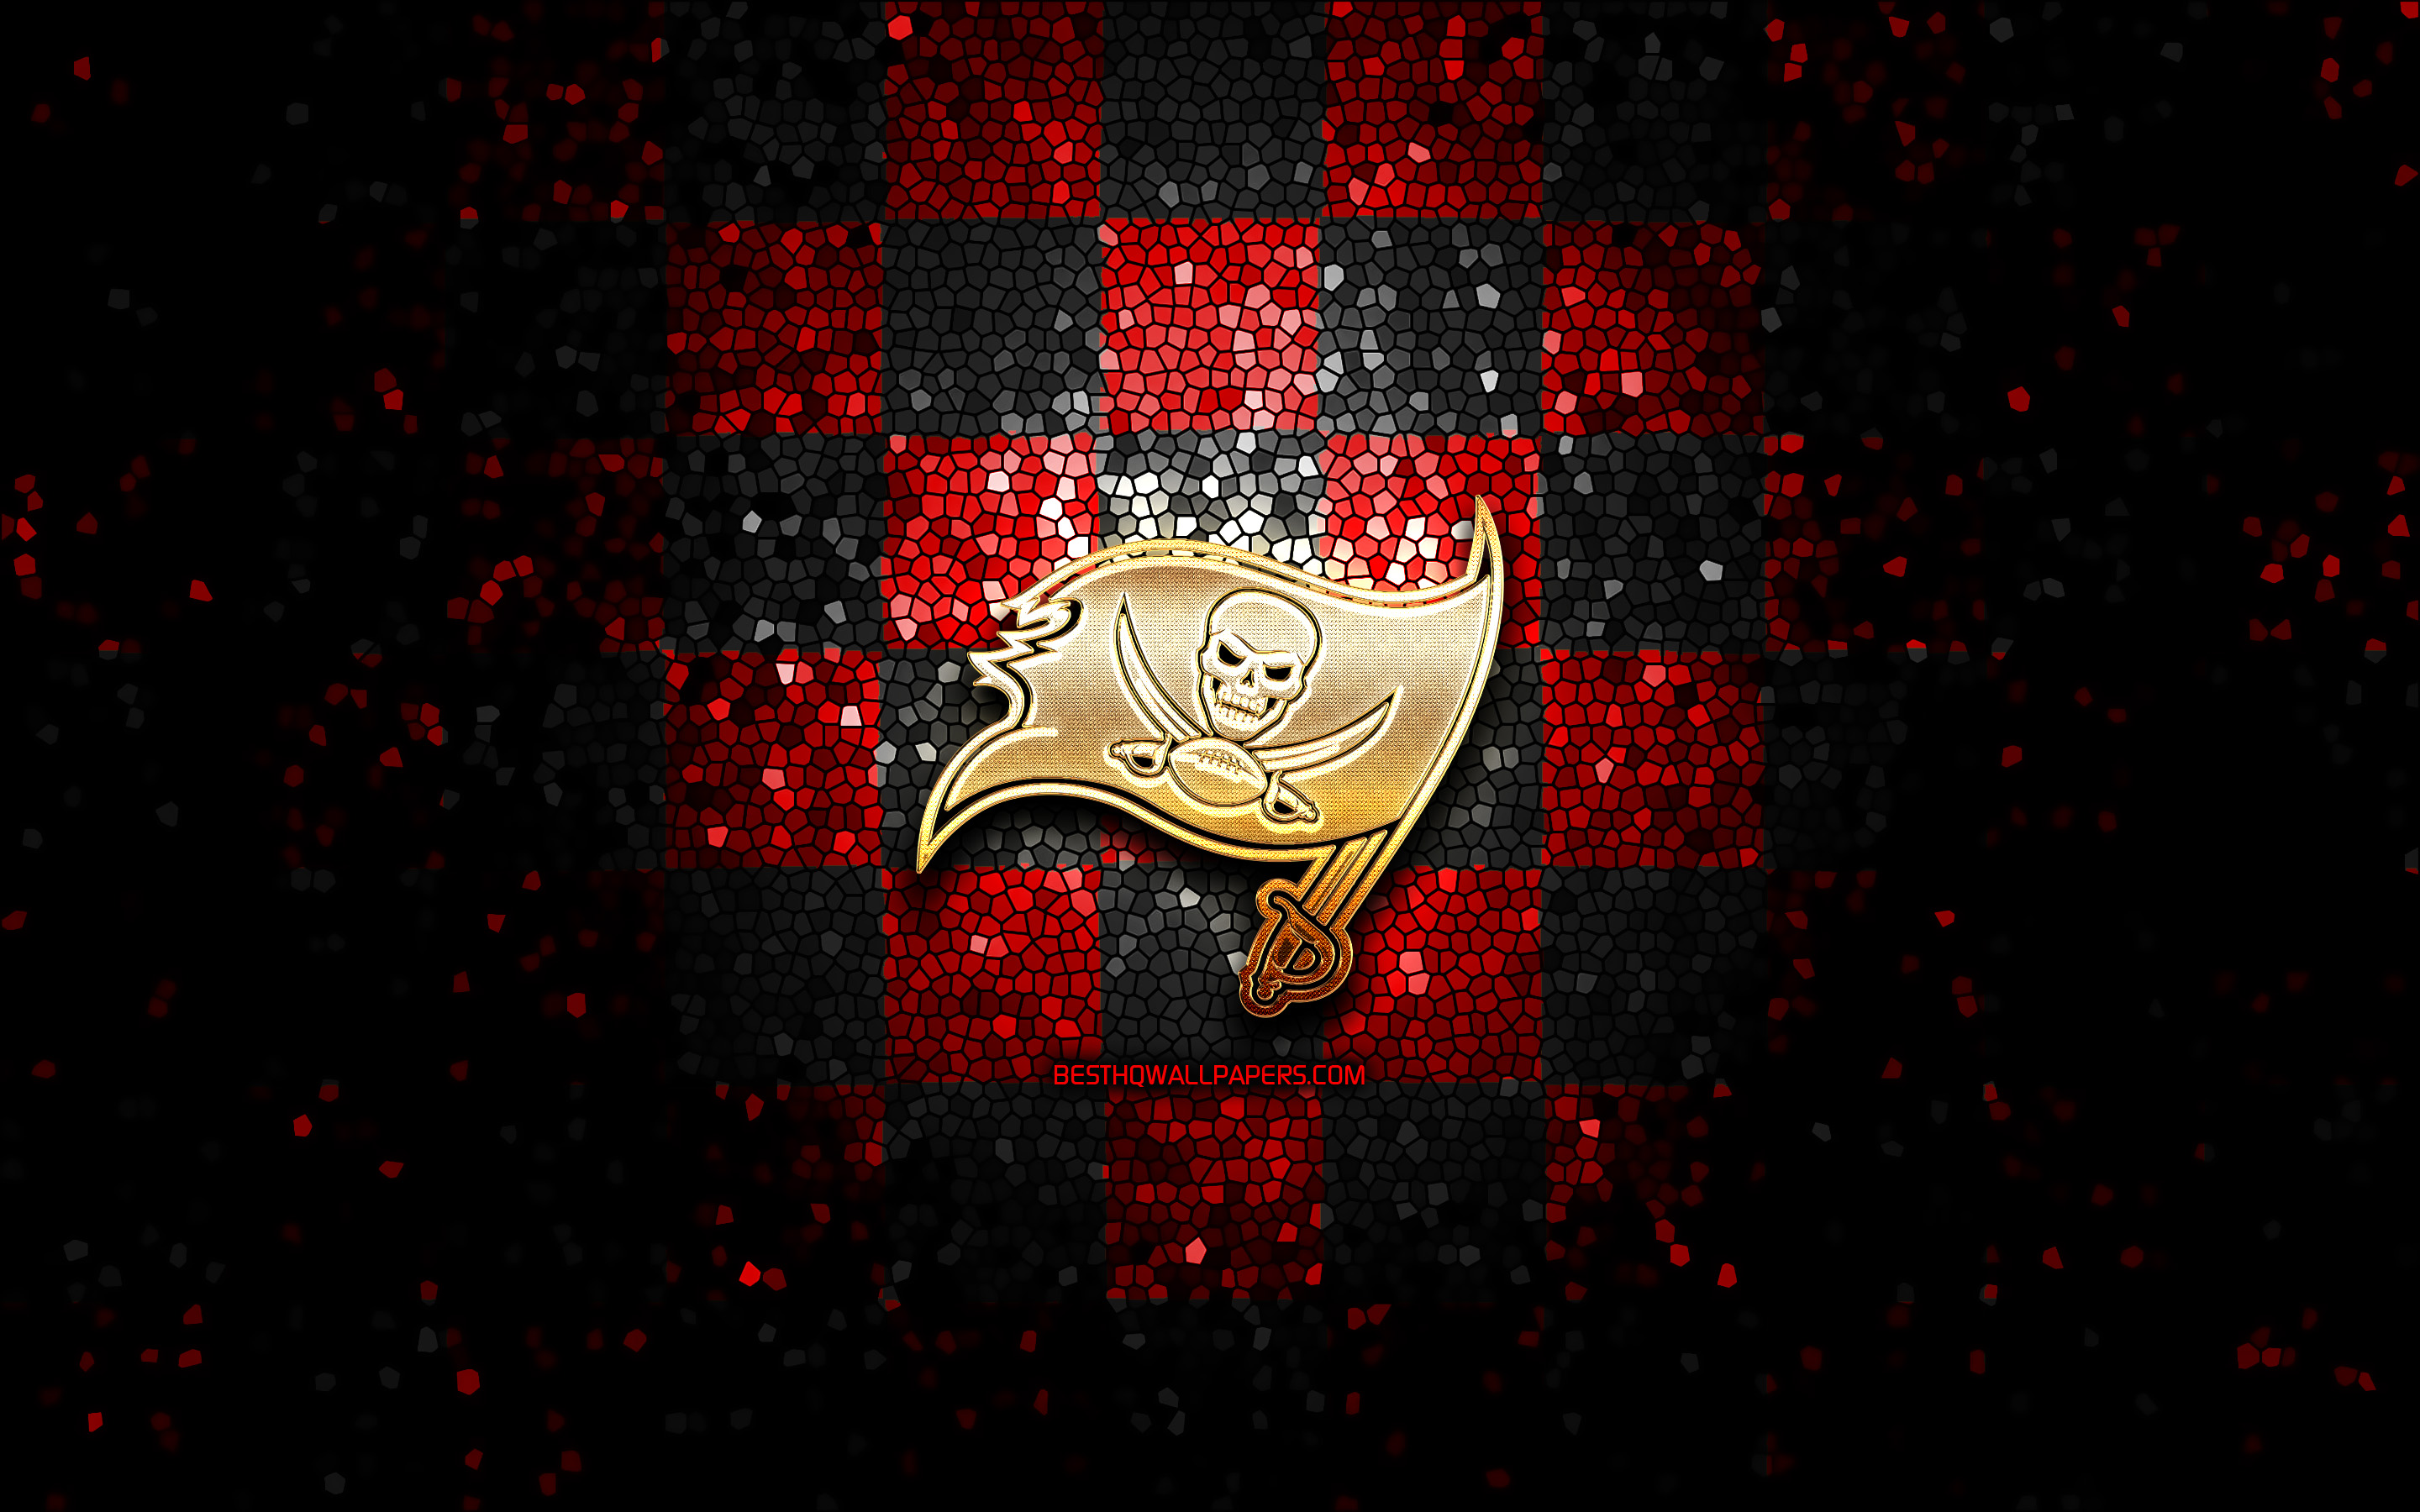 Download wallpaper Tampa Bay Buccaneers, glitter logo, NFL, red black checkered background, USA, american football team, Tampa Bay Buccaneers logo, mosaic art, american football, America for desktop with resolution 2880x1800. High Quality